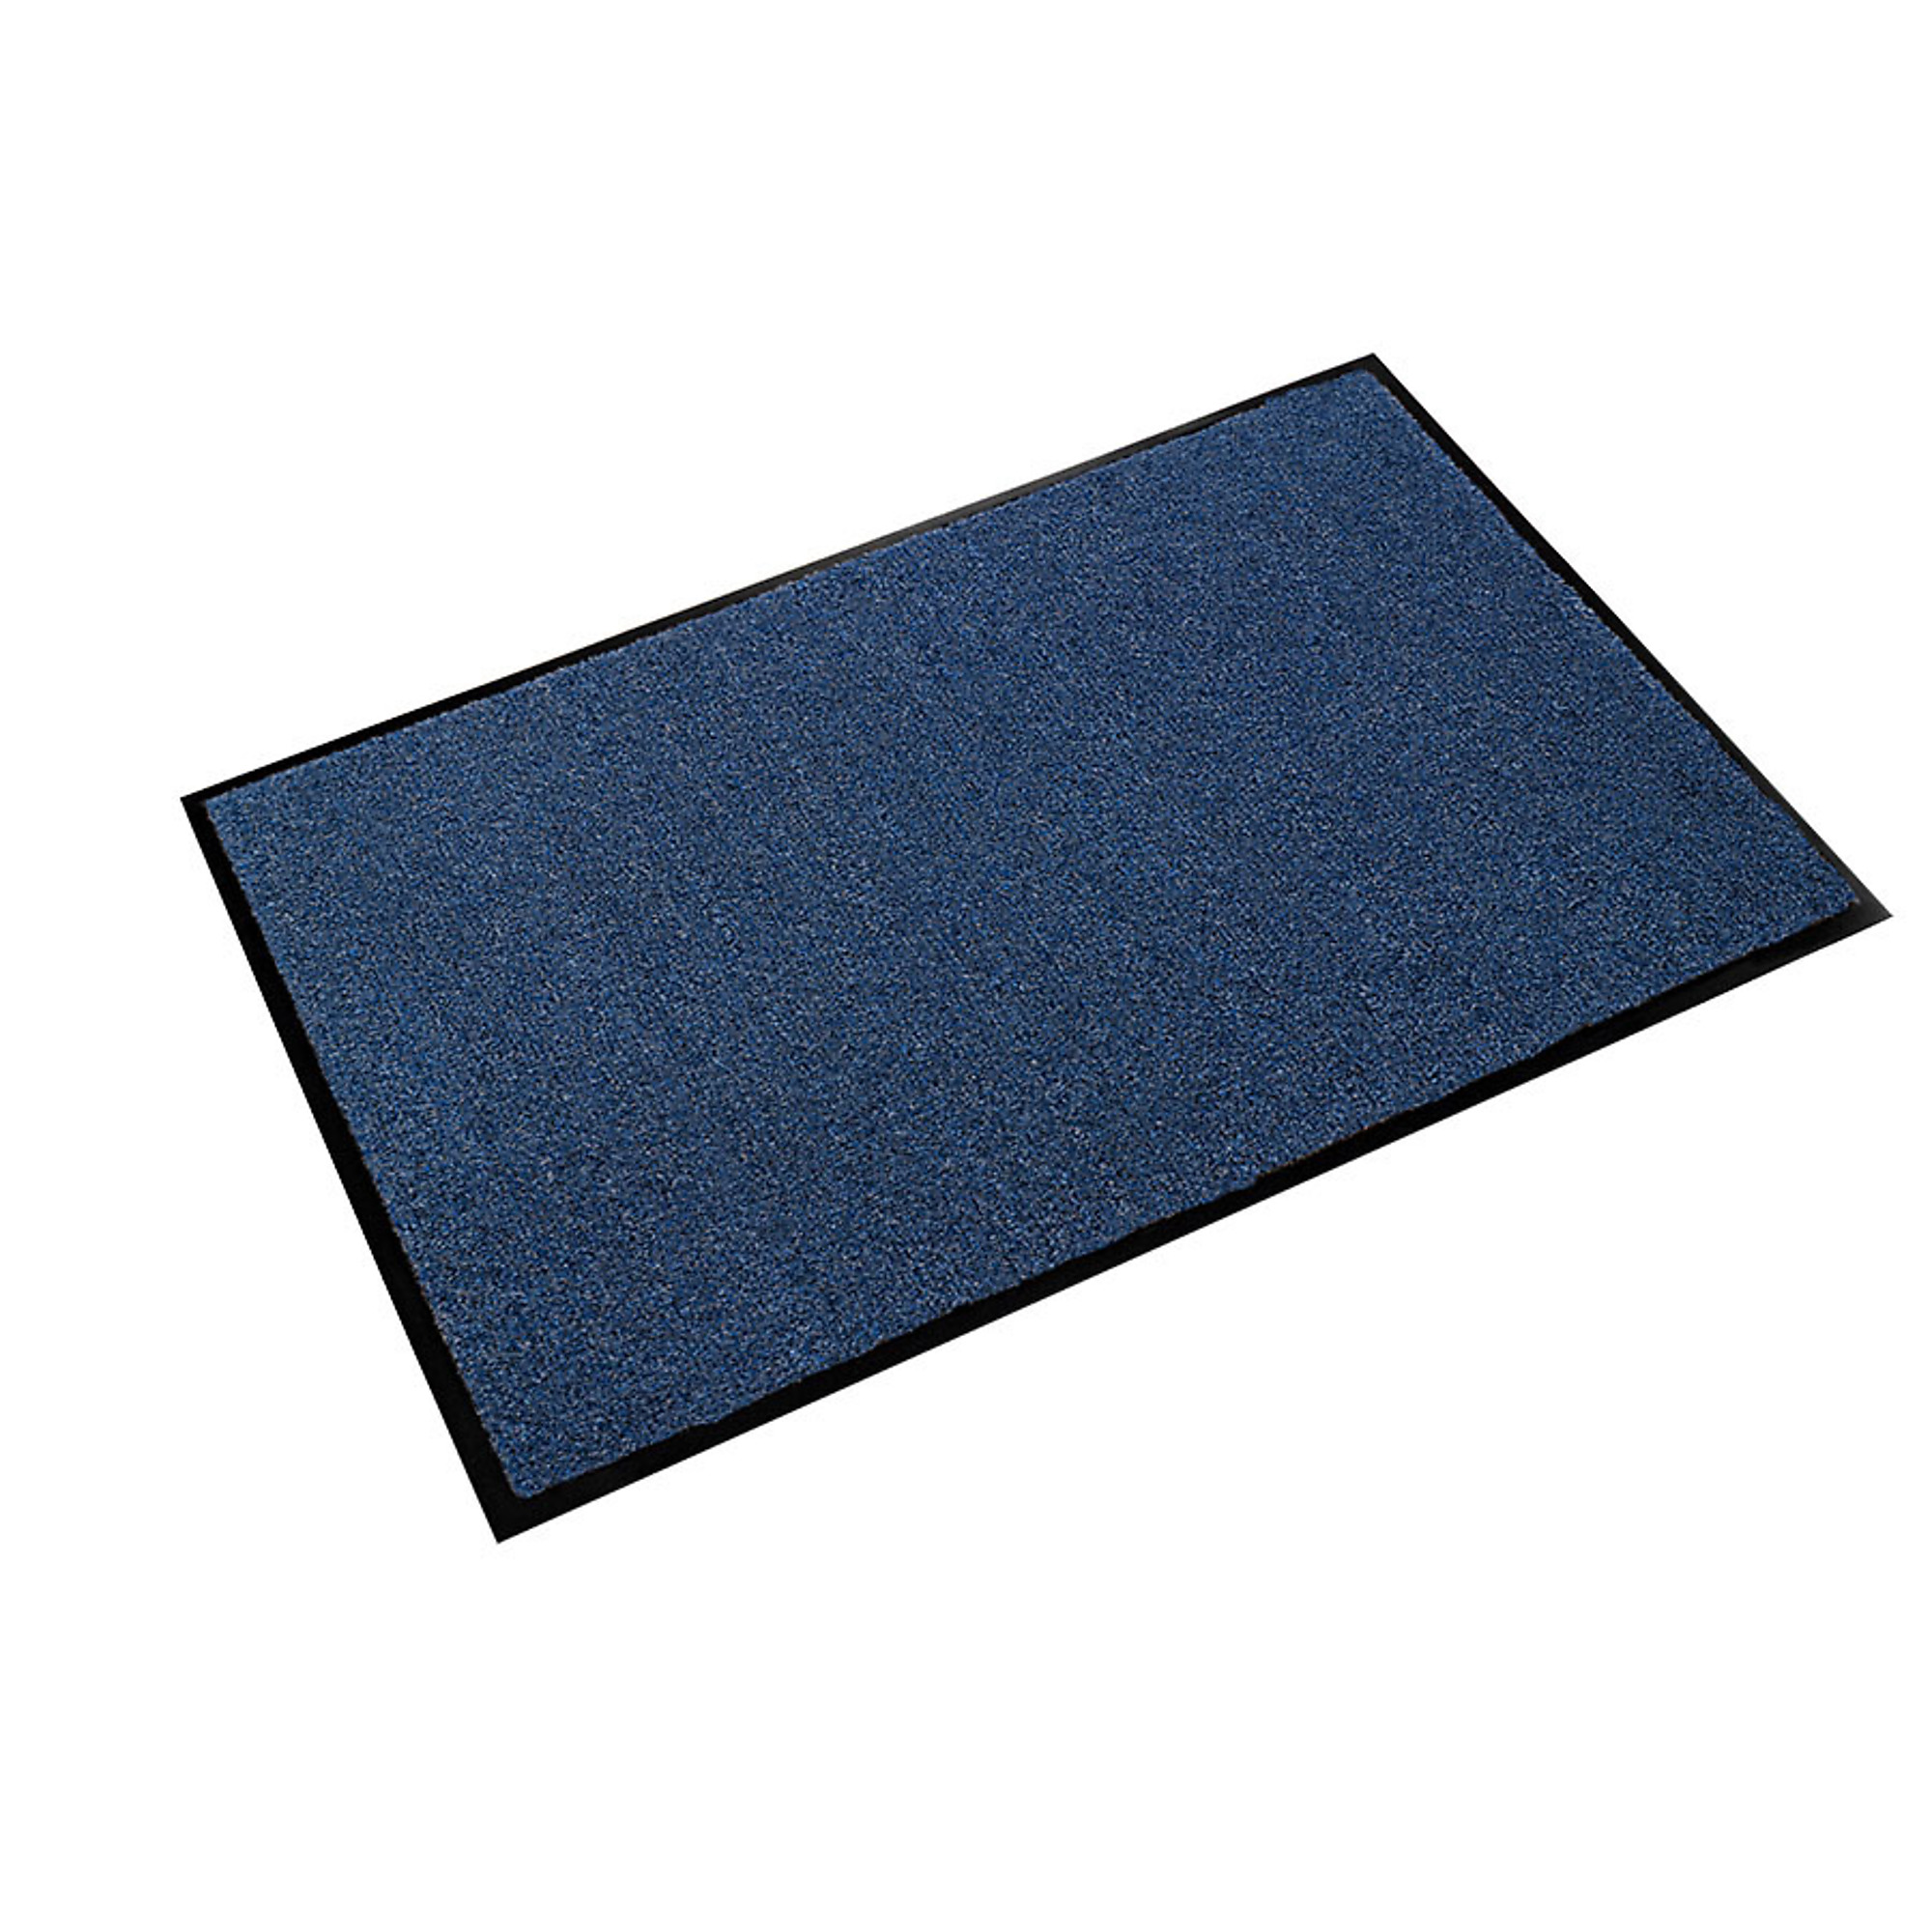 Crown Matting Technologies, Rely-On Olefin 3ft.x5ft. Marlin Blue, Width 36 in, Length 60 in, Thickness 3/8 in, Model GS 0035MB